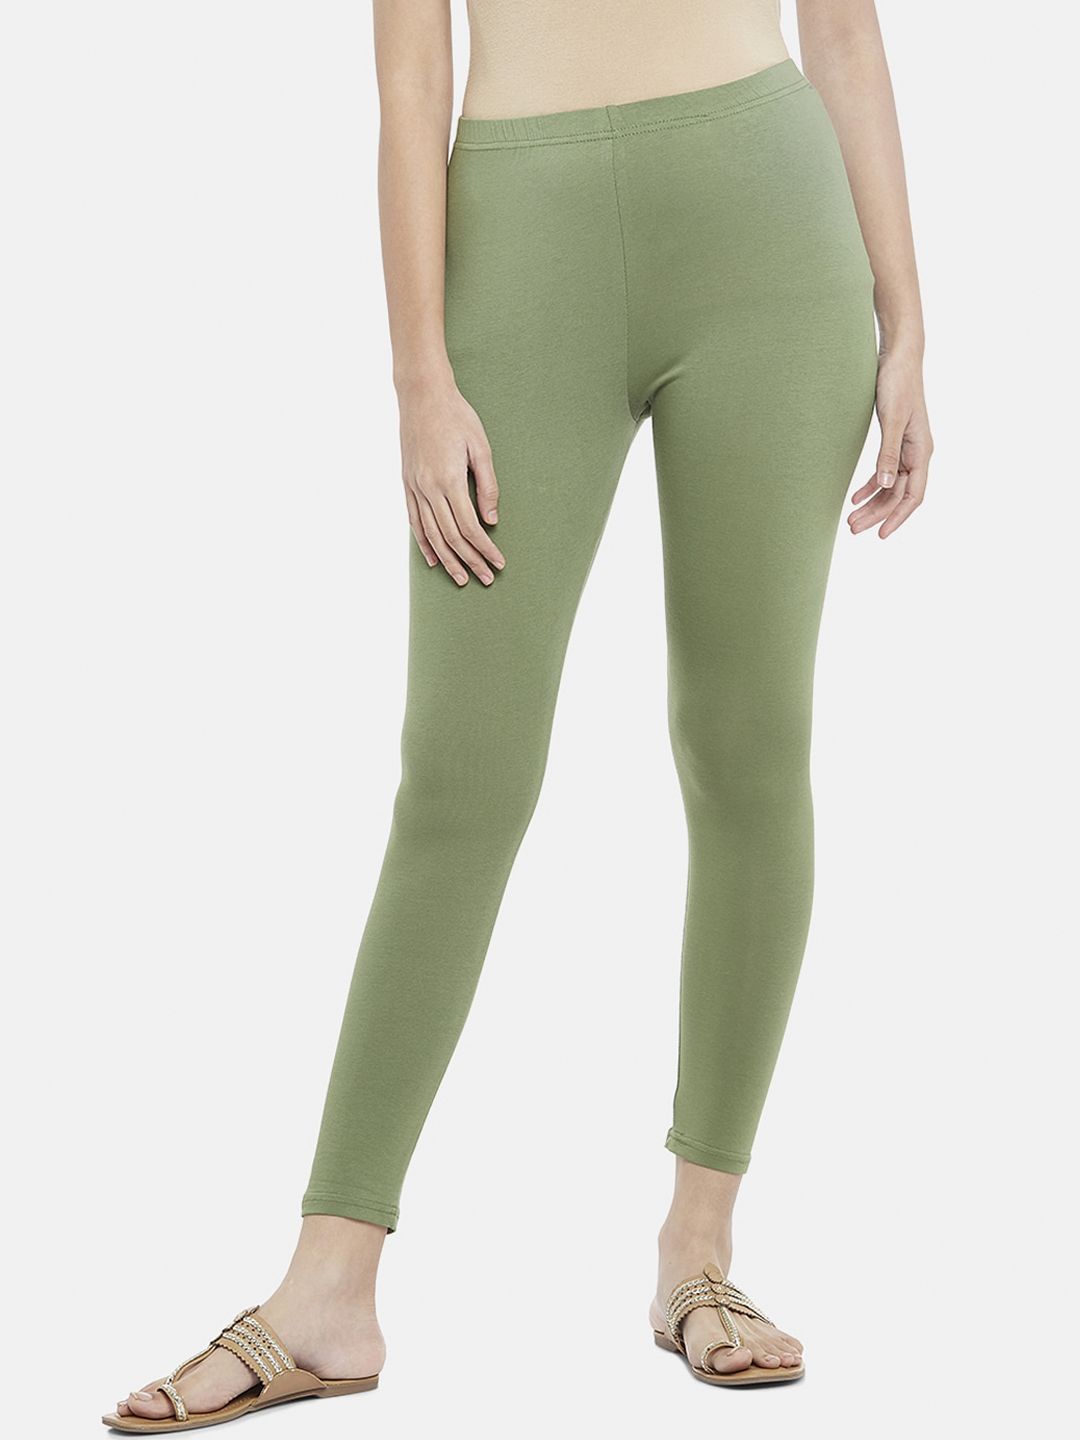 RANGMANCH BY PANTALOONS Women Green Solid Ankle-Length Leggings Price in India